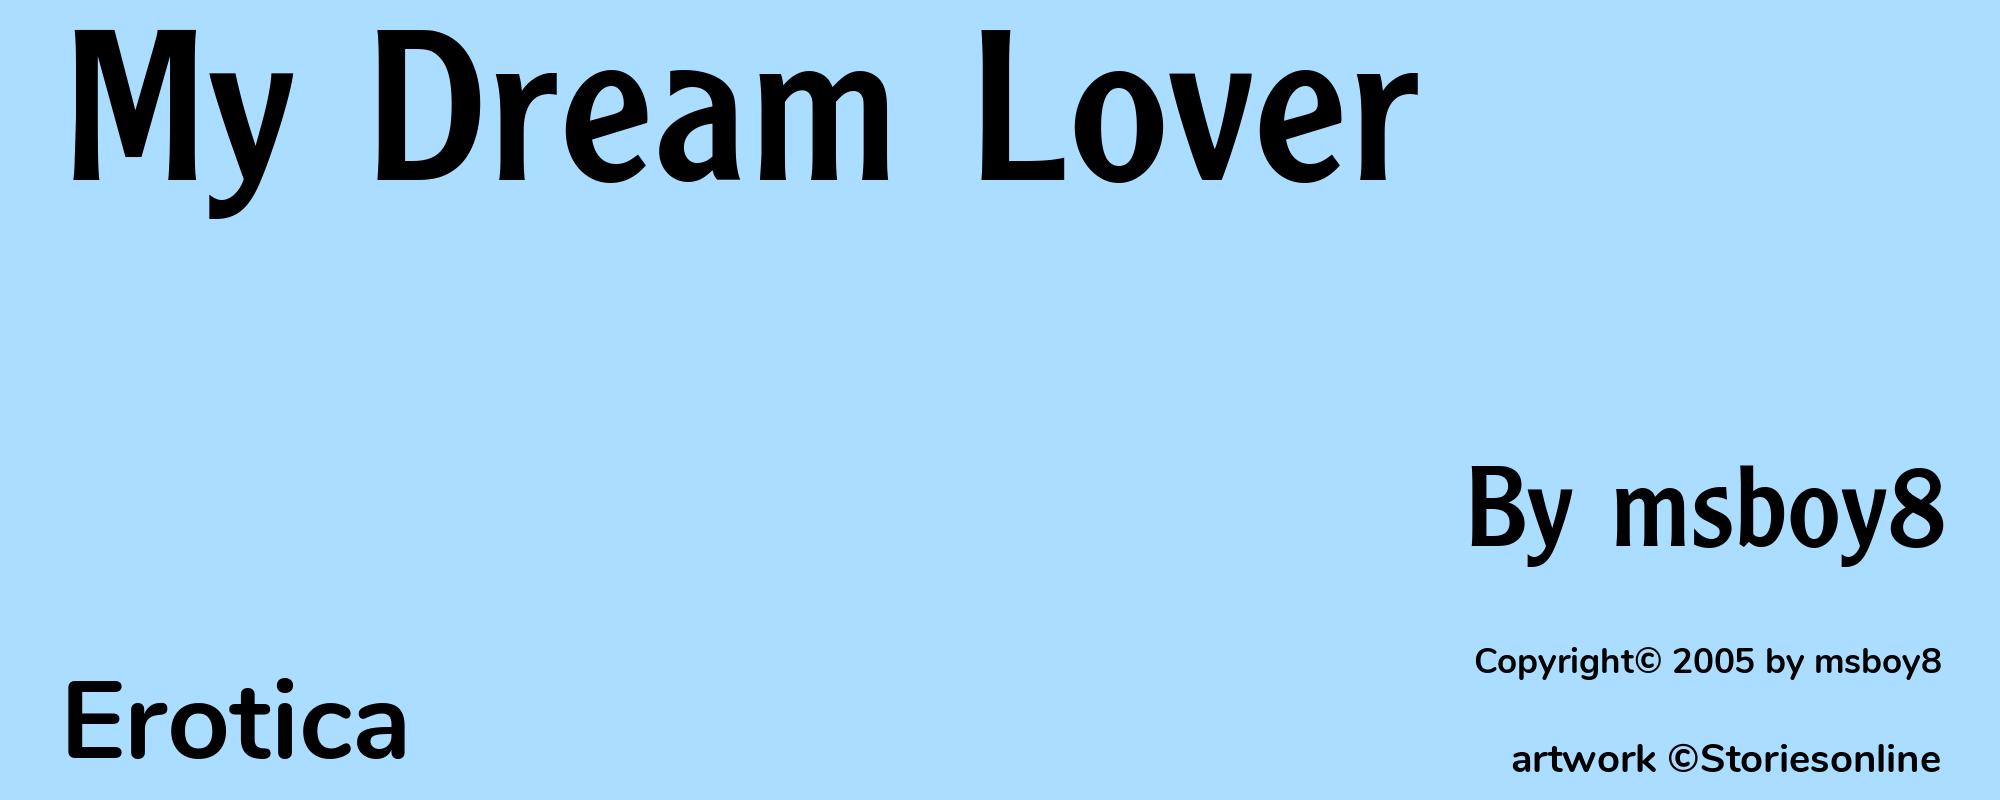 My Dream Lover - Cover